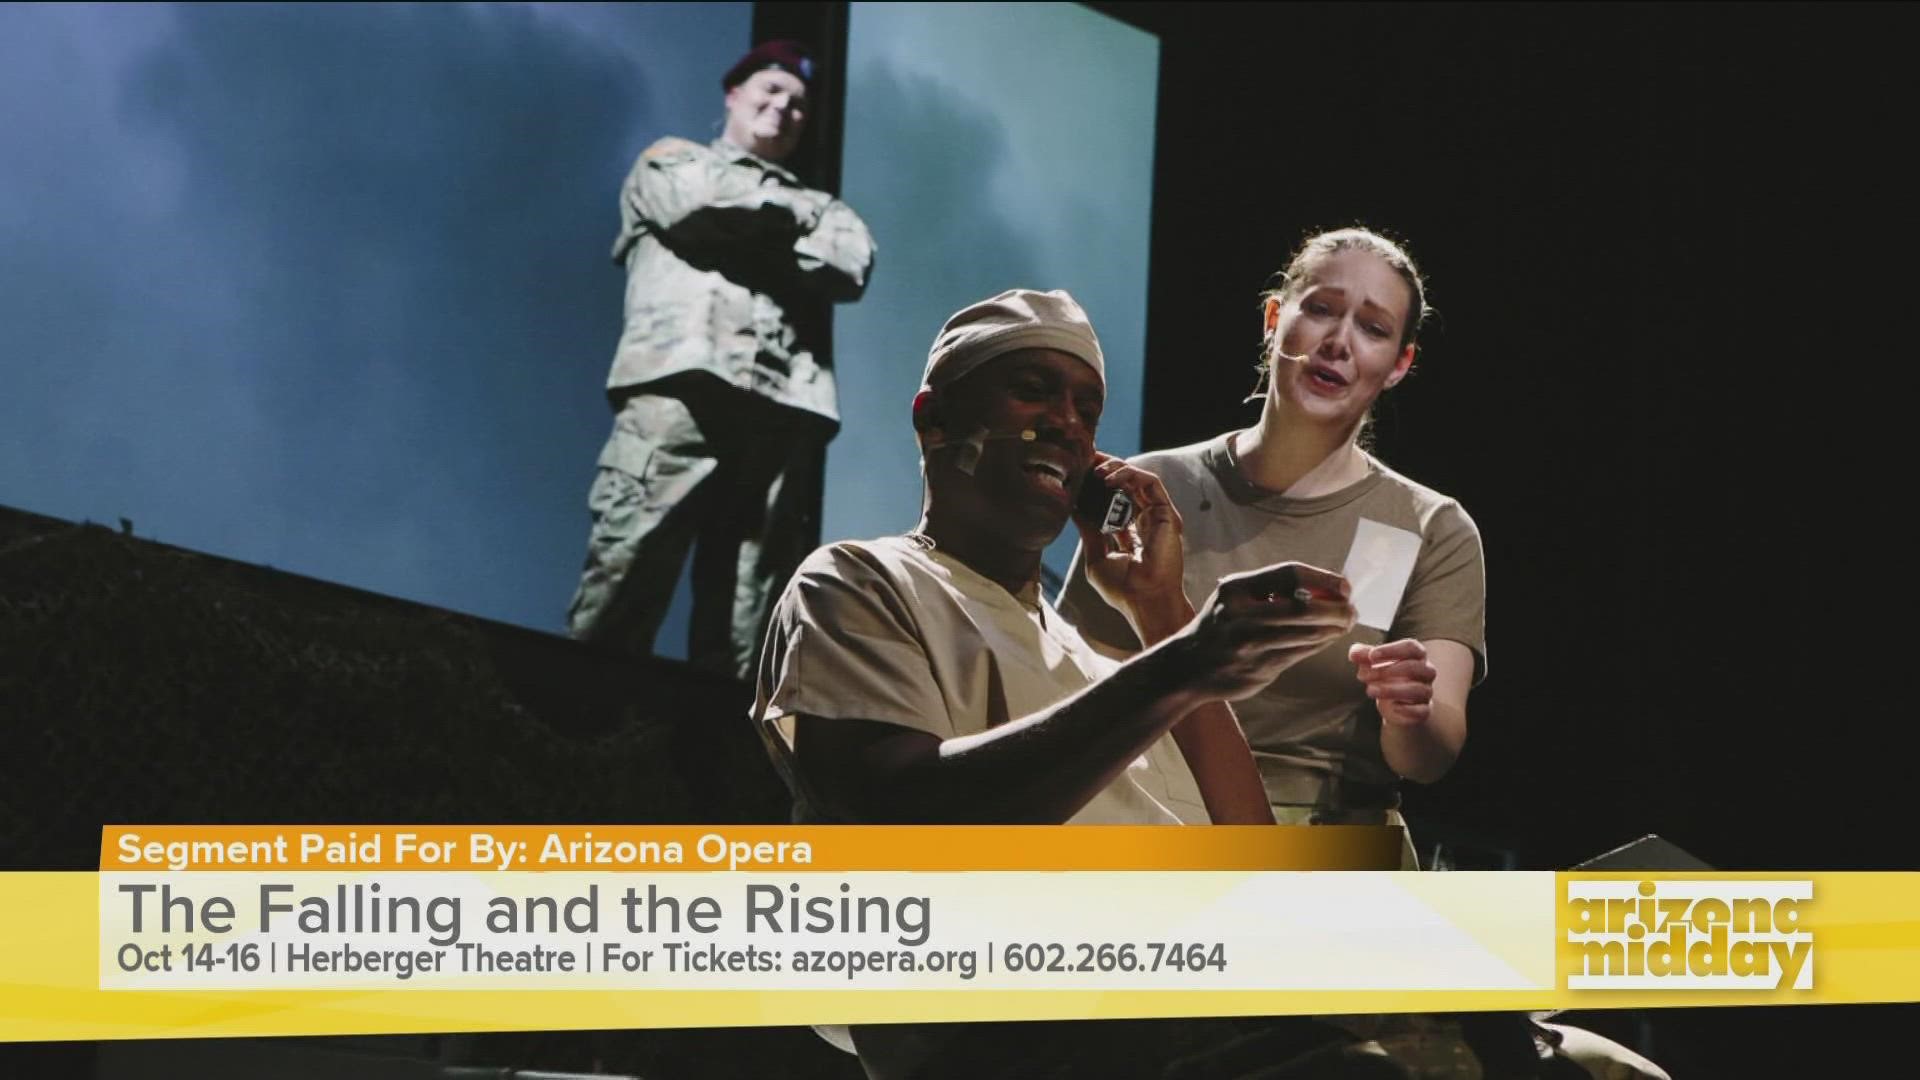 We went behind the scenes with Arizona Opera to see the production behind their unique production - "The Falling and The Rising" - about military service members.